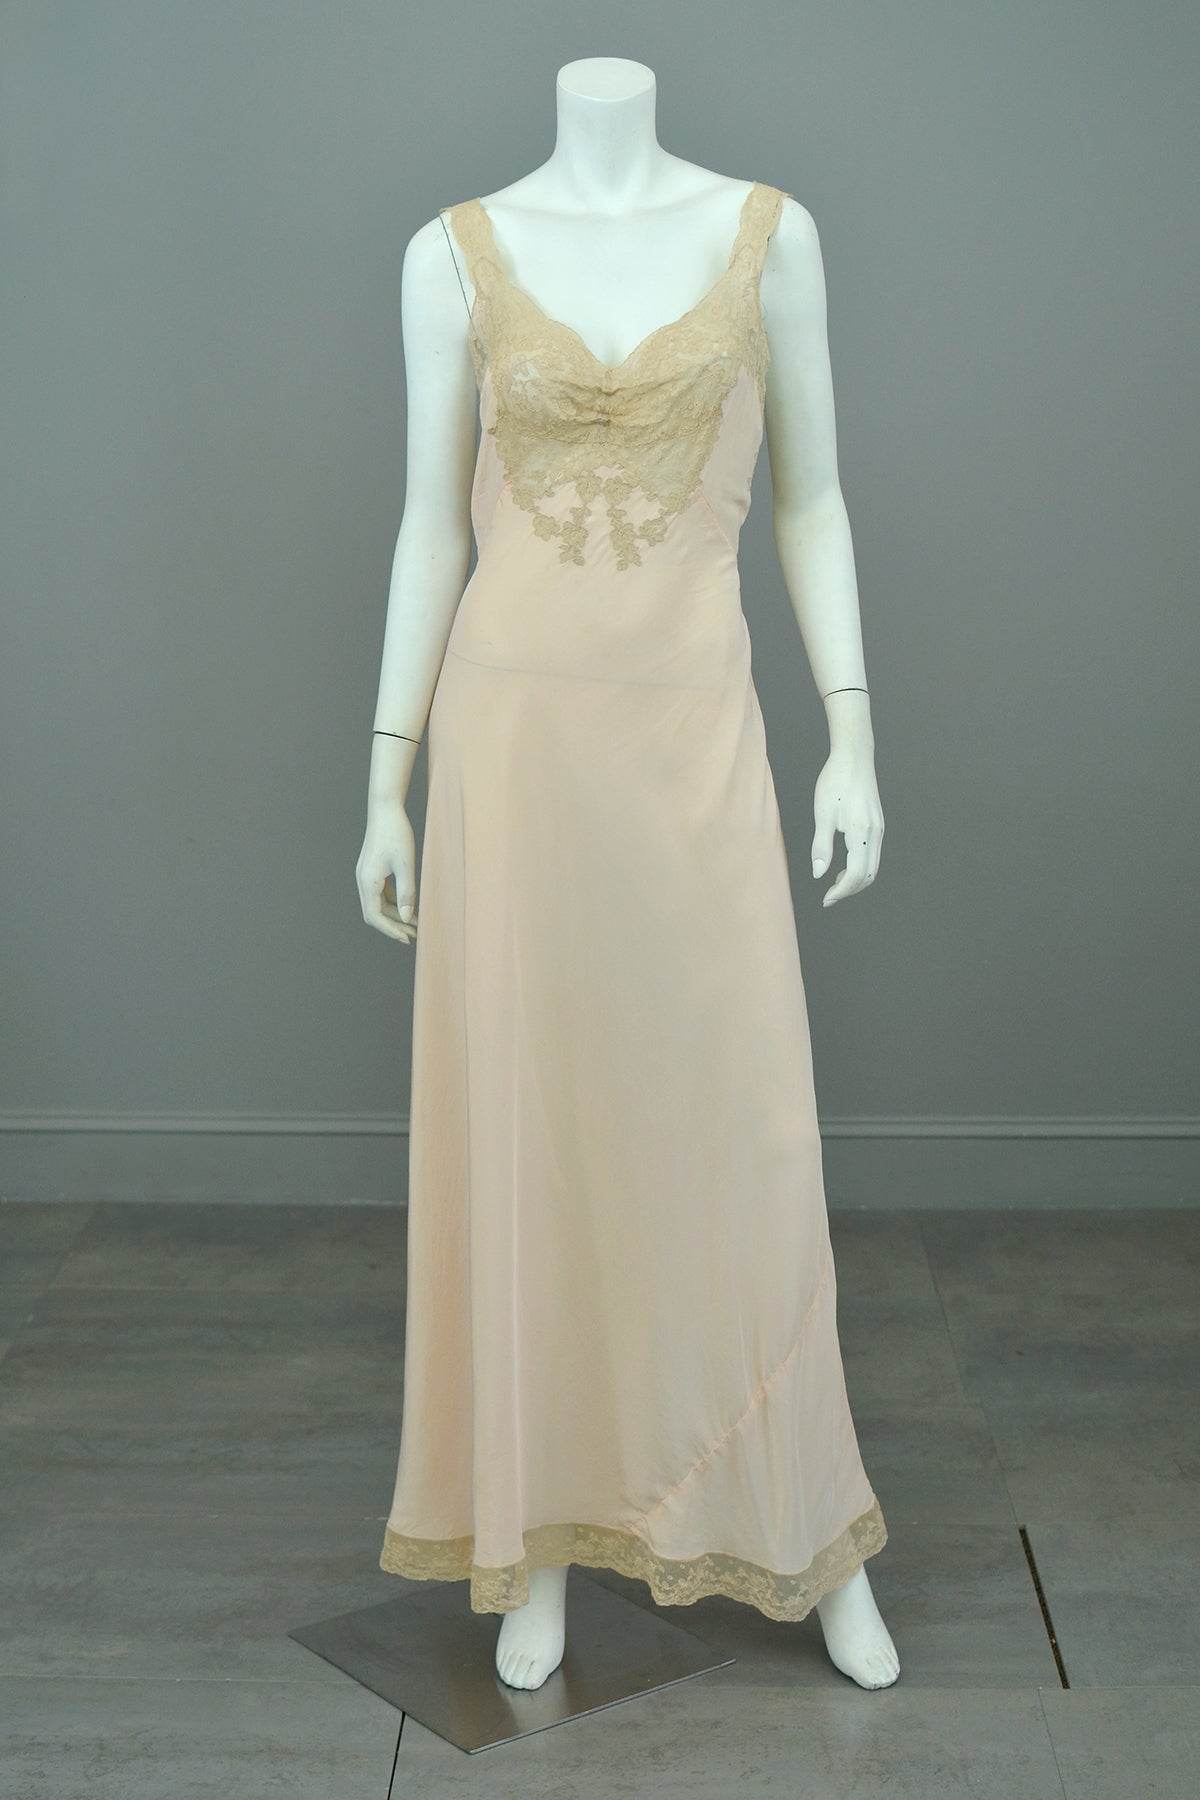 1930s Pure Peach Silk with Ecru Lace Bodice Hollywood Glam Slip Dress Gown